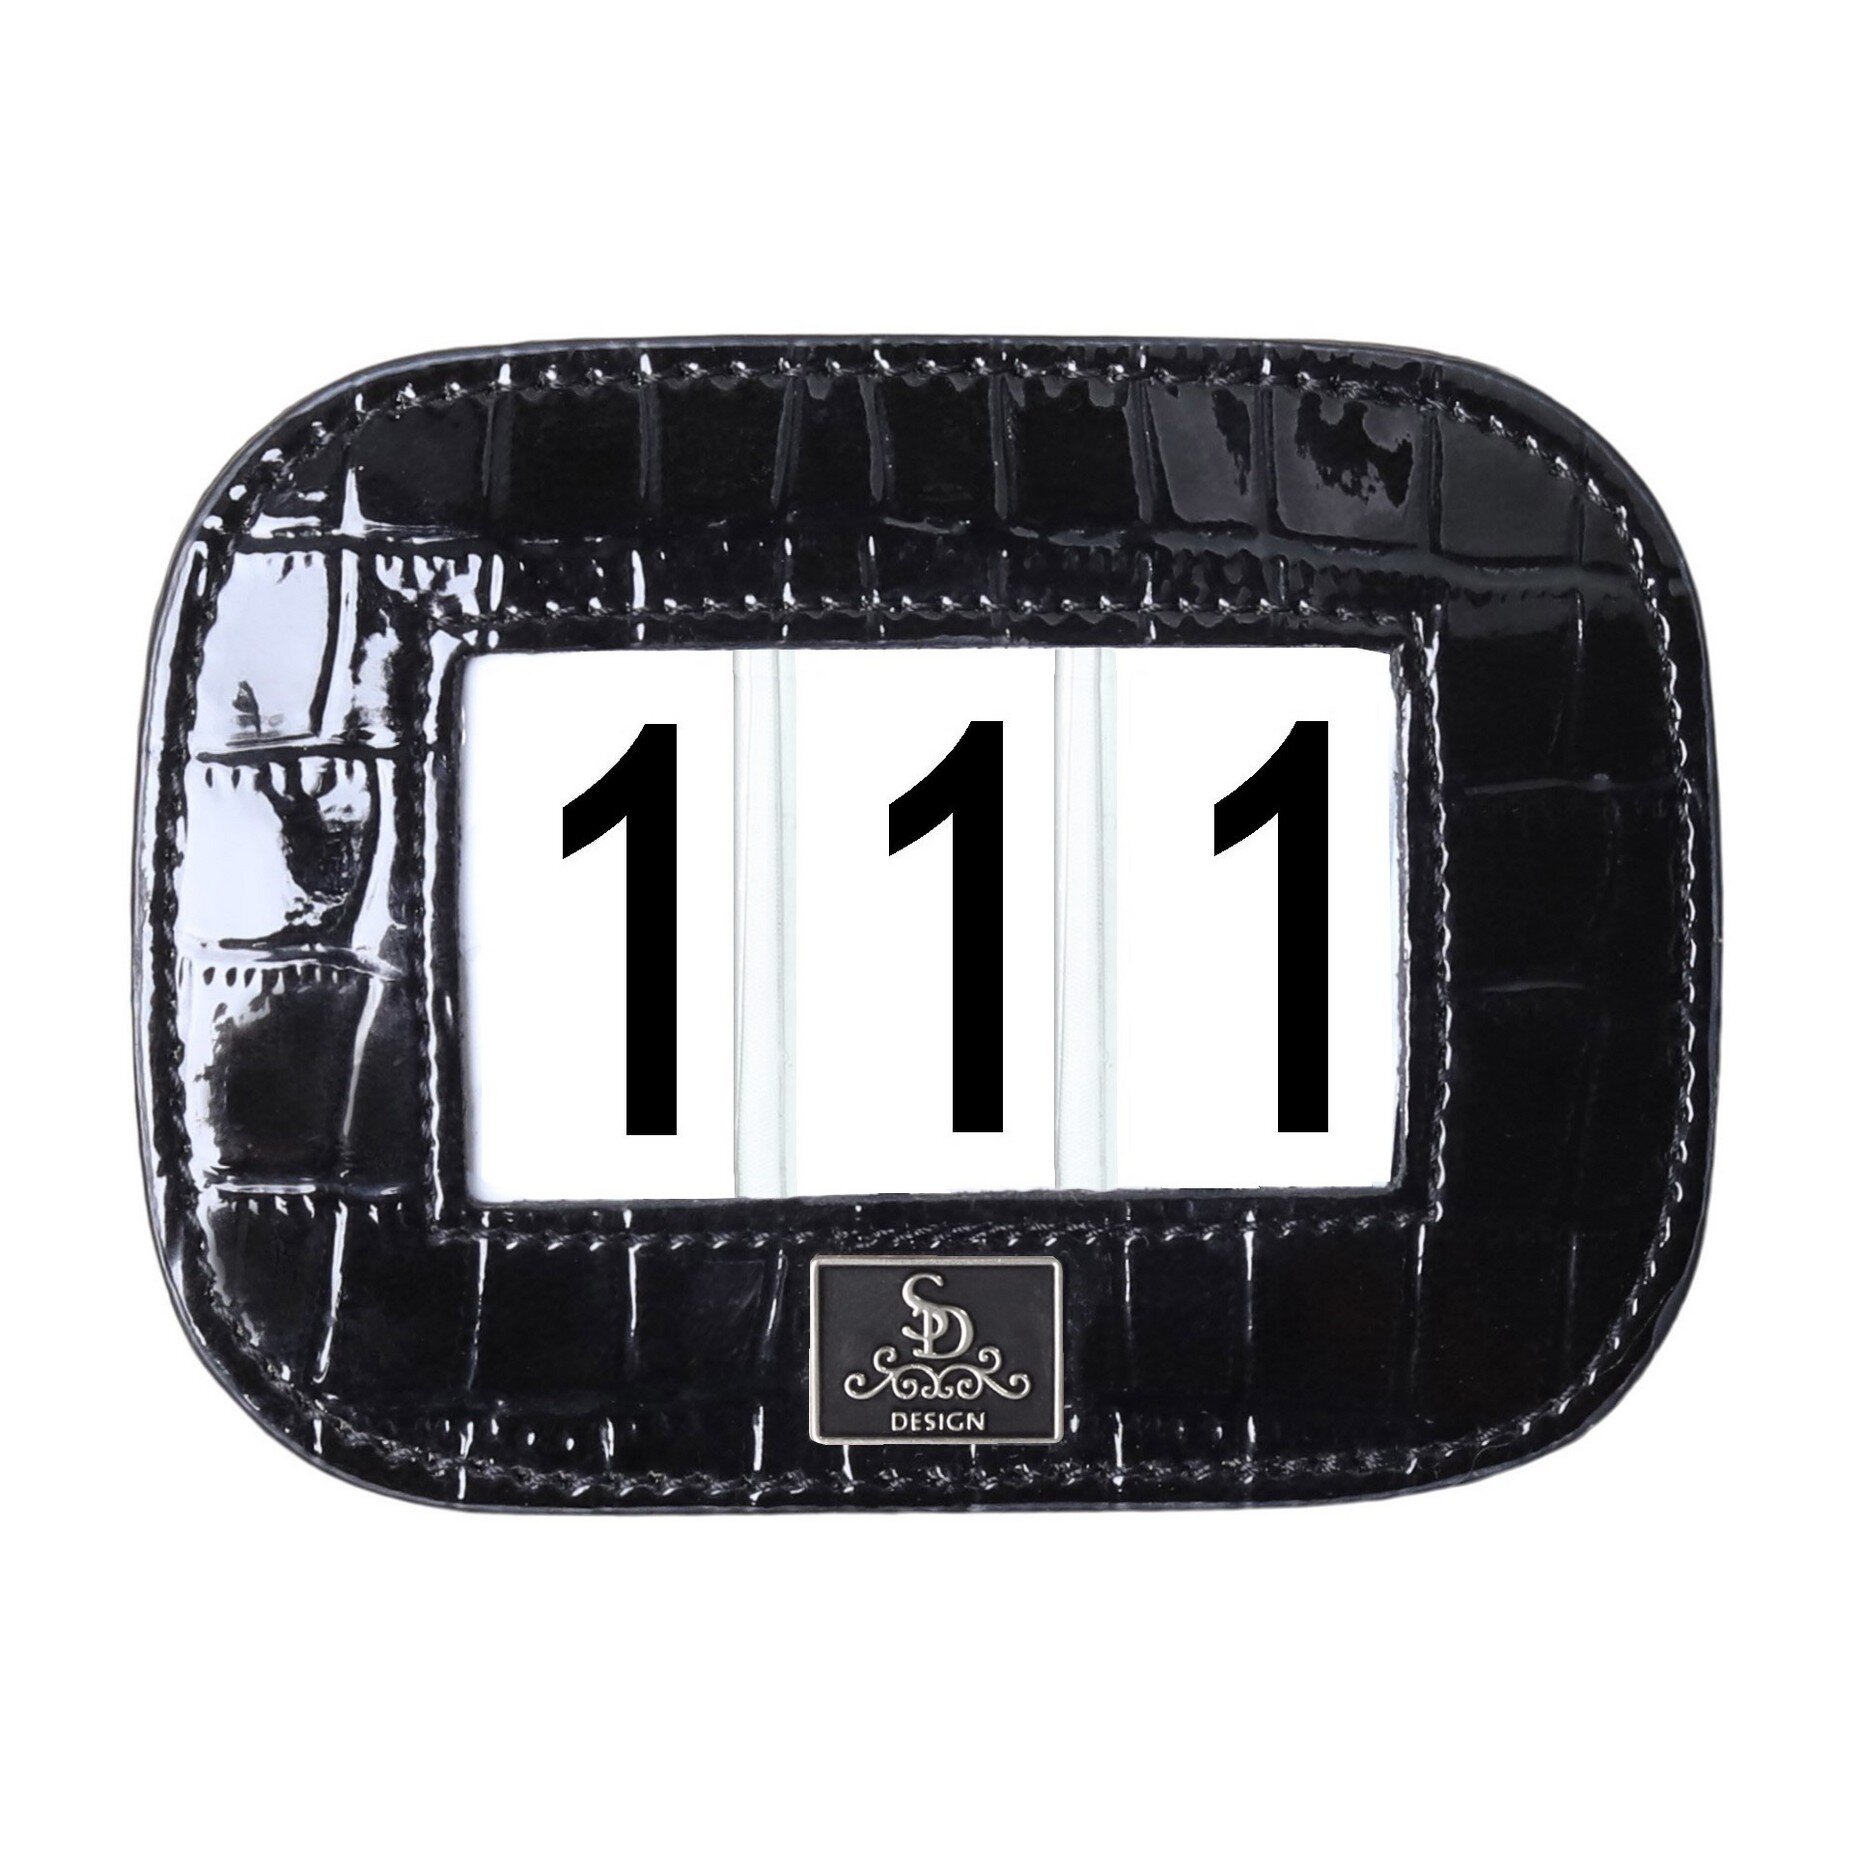 Number holder Croco lacquer - Black